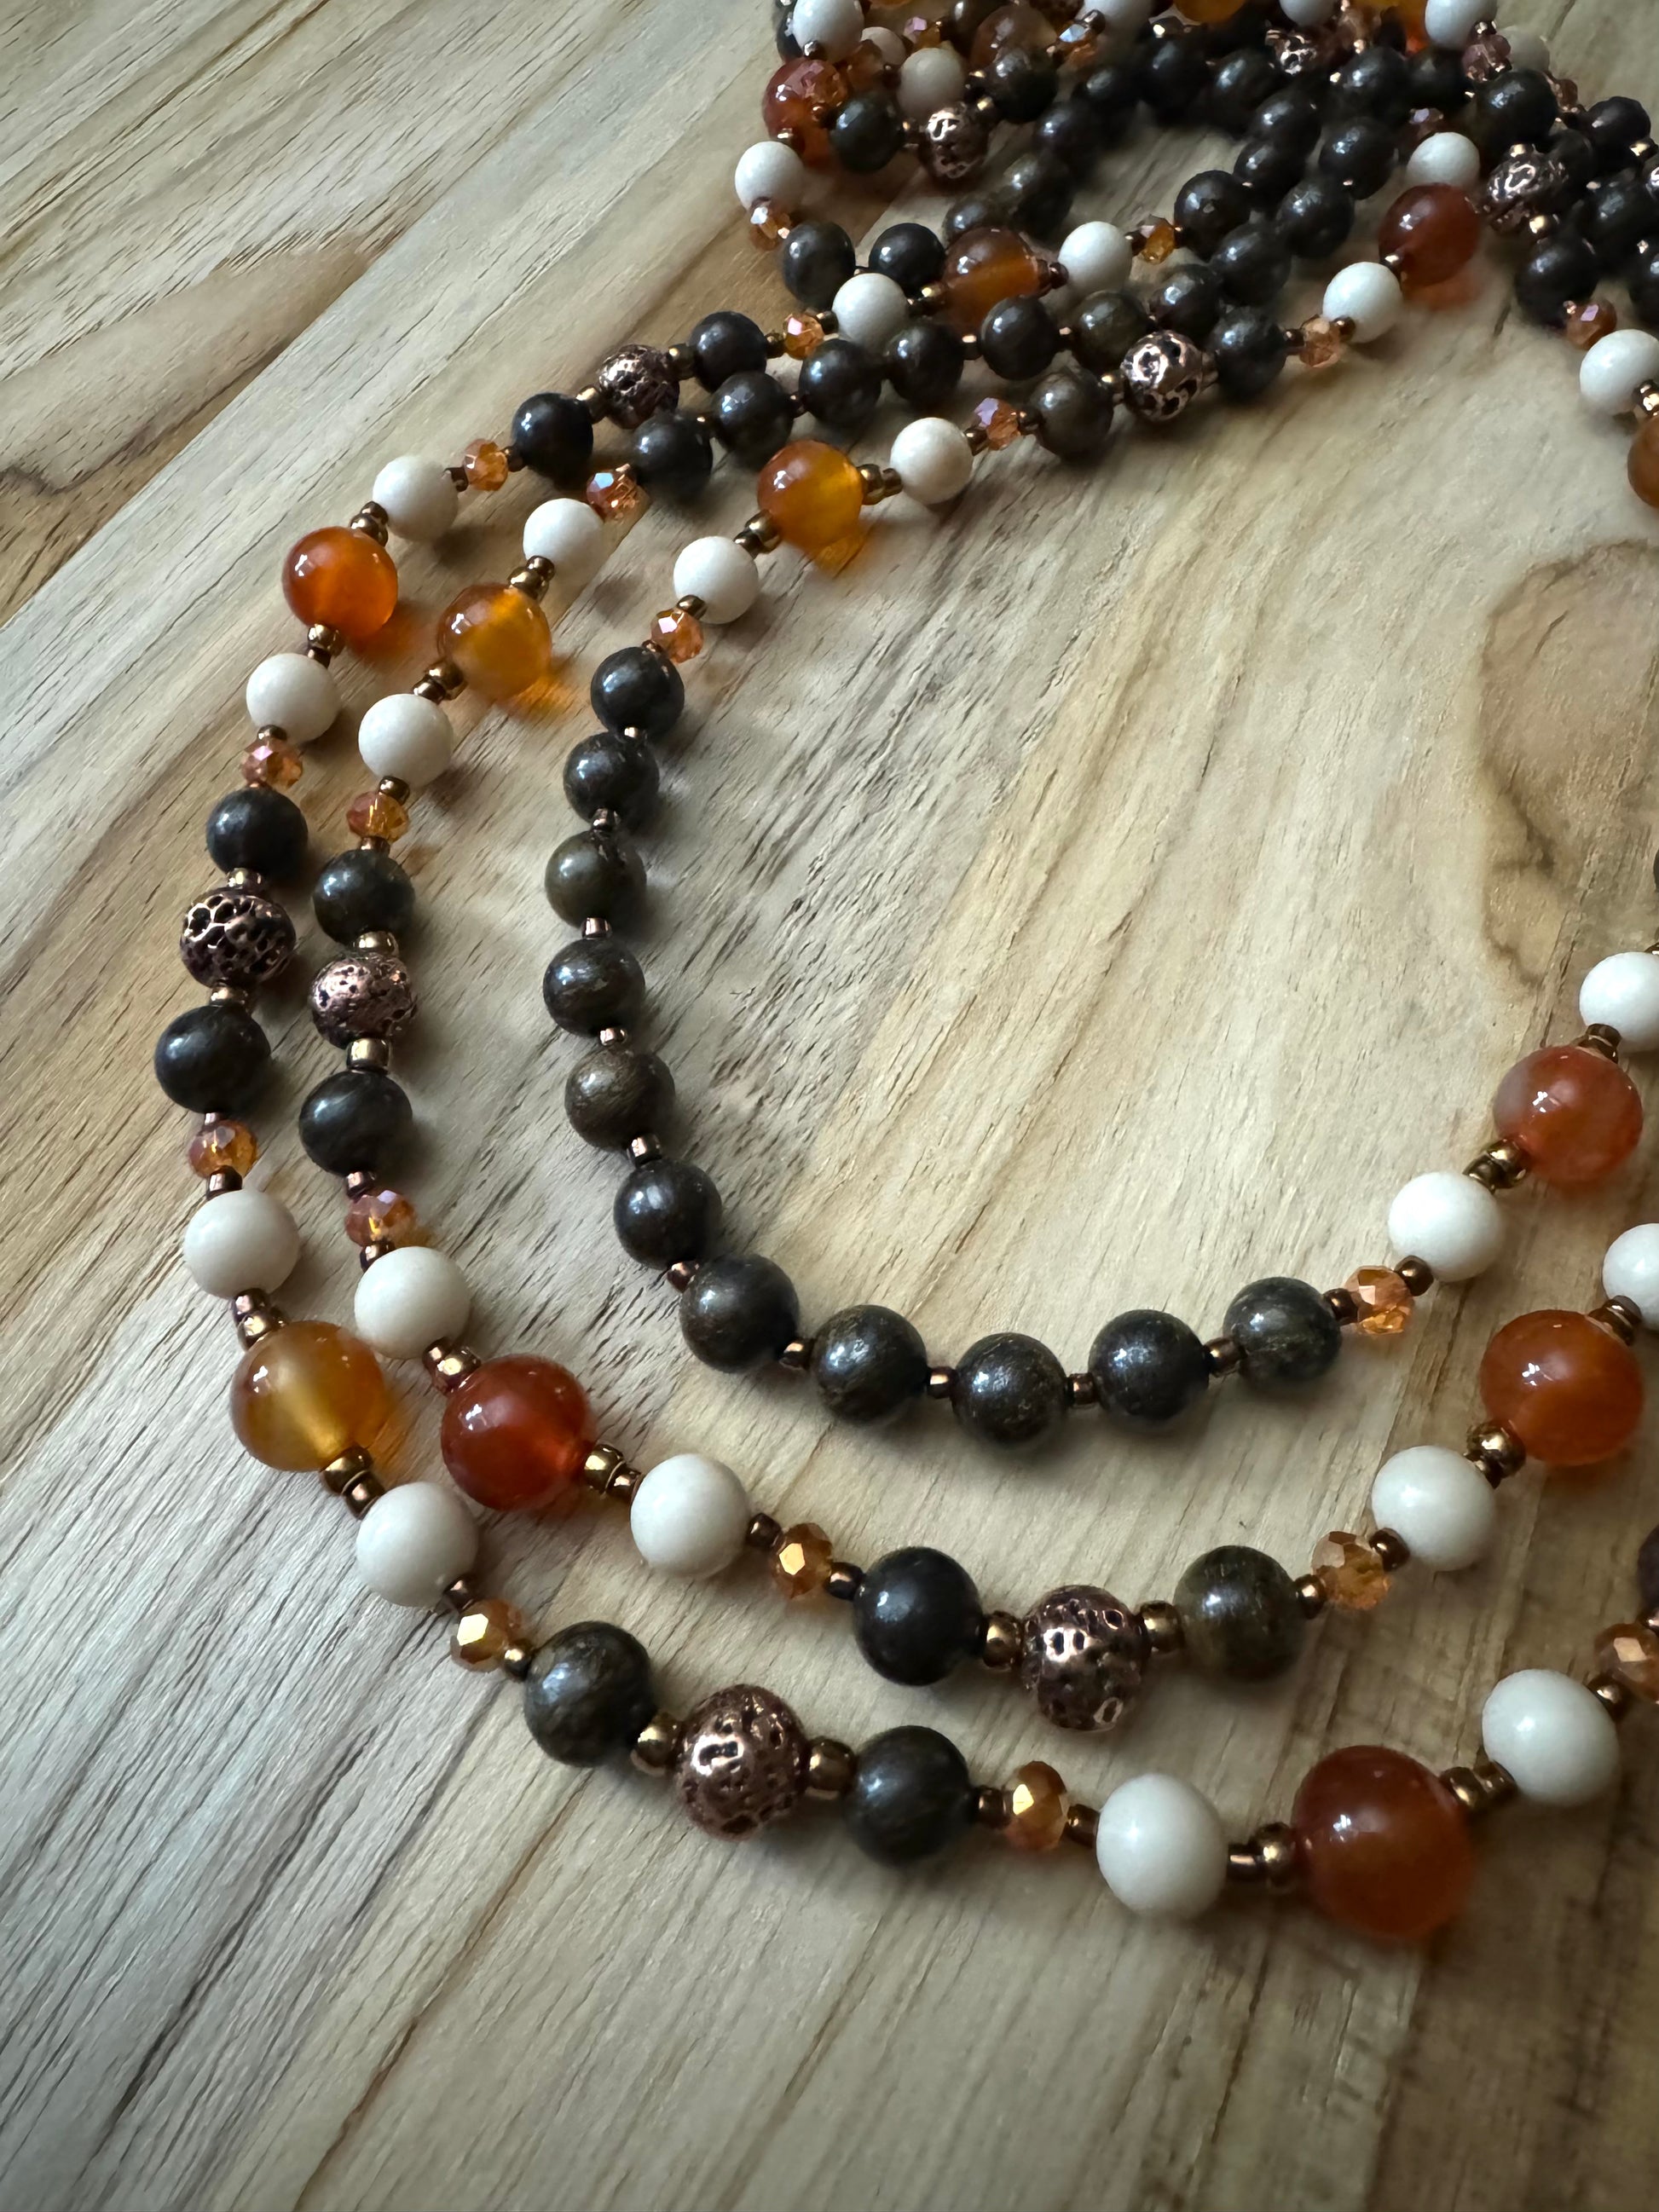 Extra Long Bronzite Beaded Necklace with Orange Agate Riverstone Lava Stone and Crystal Beads - My Urban Gems